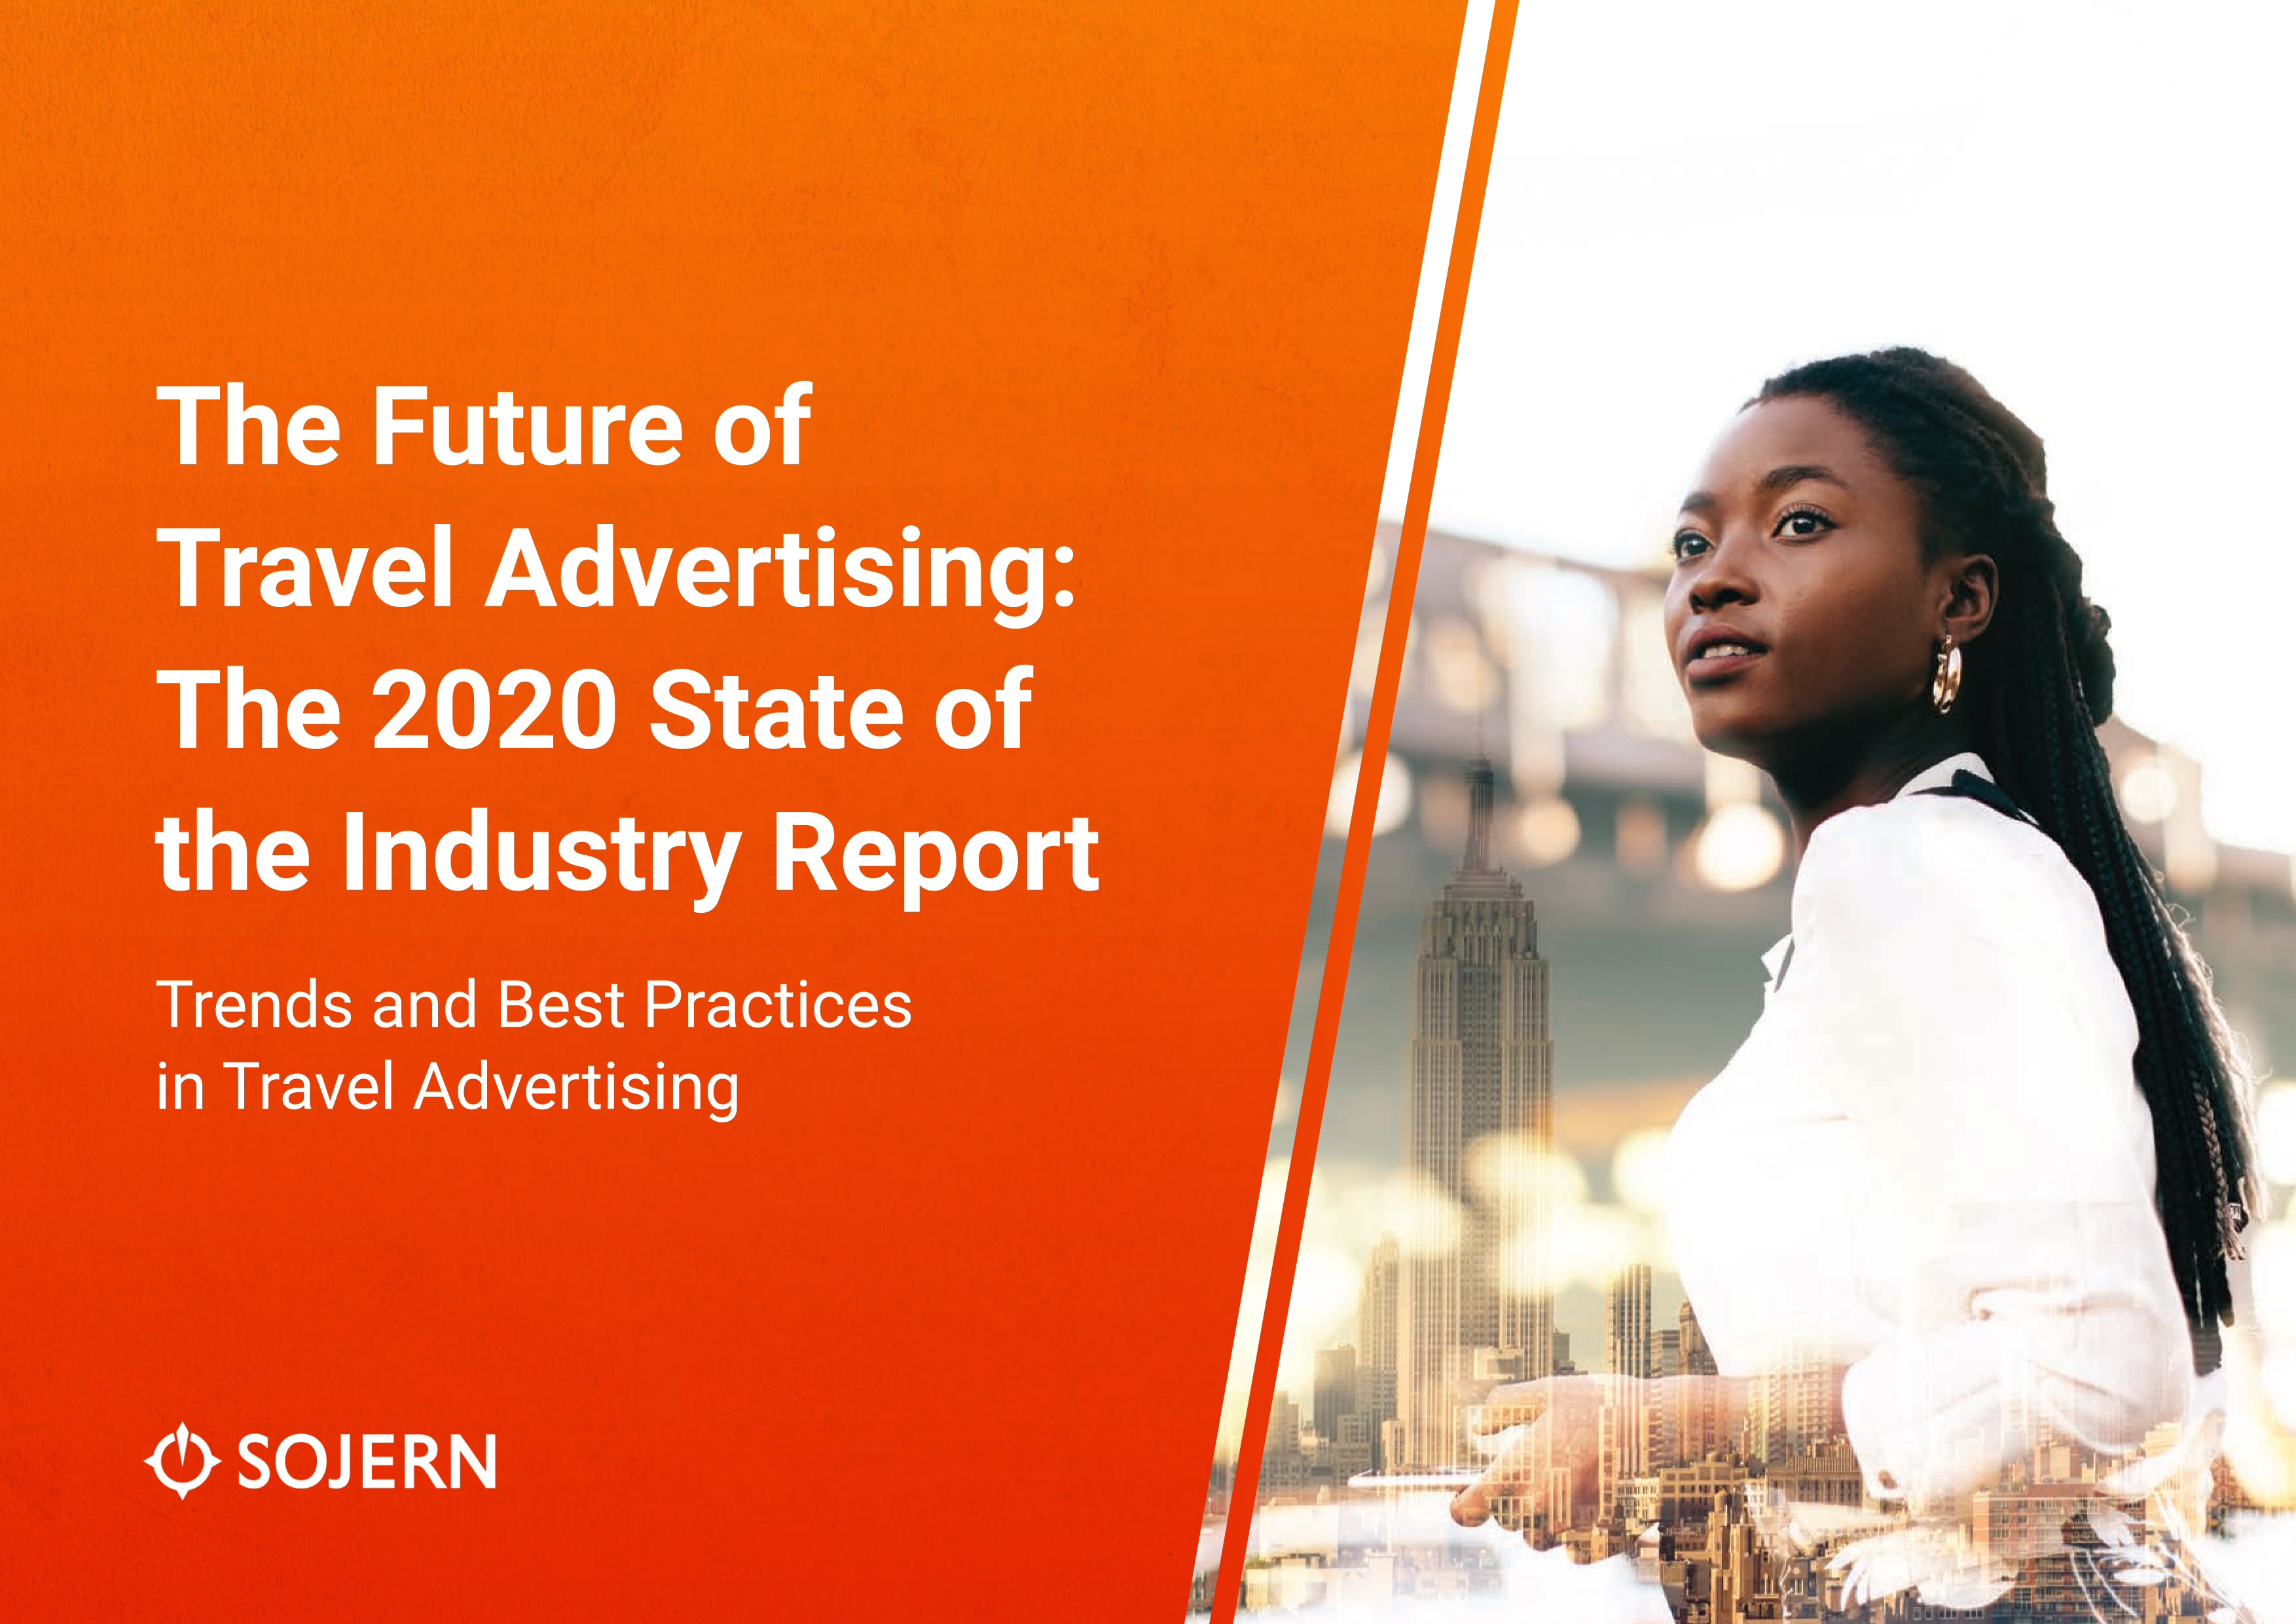 Travel marketing trends revealed in new report